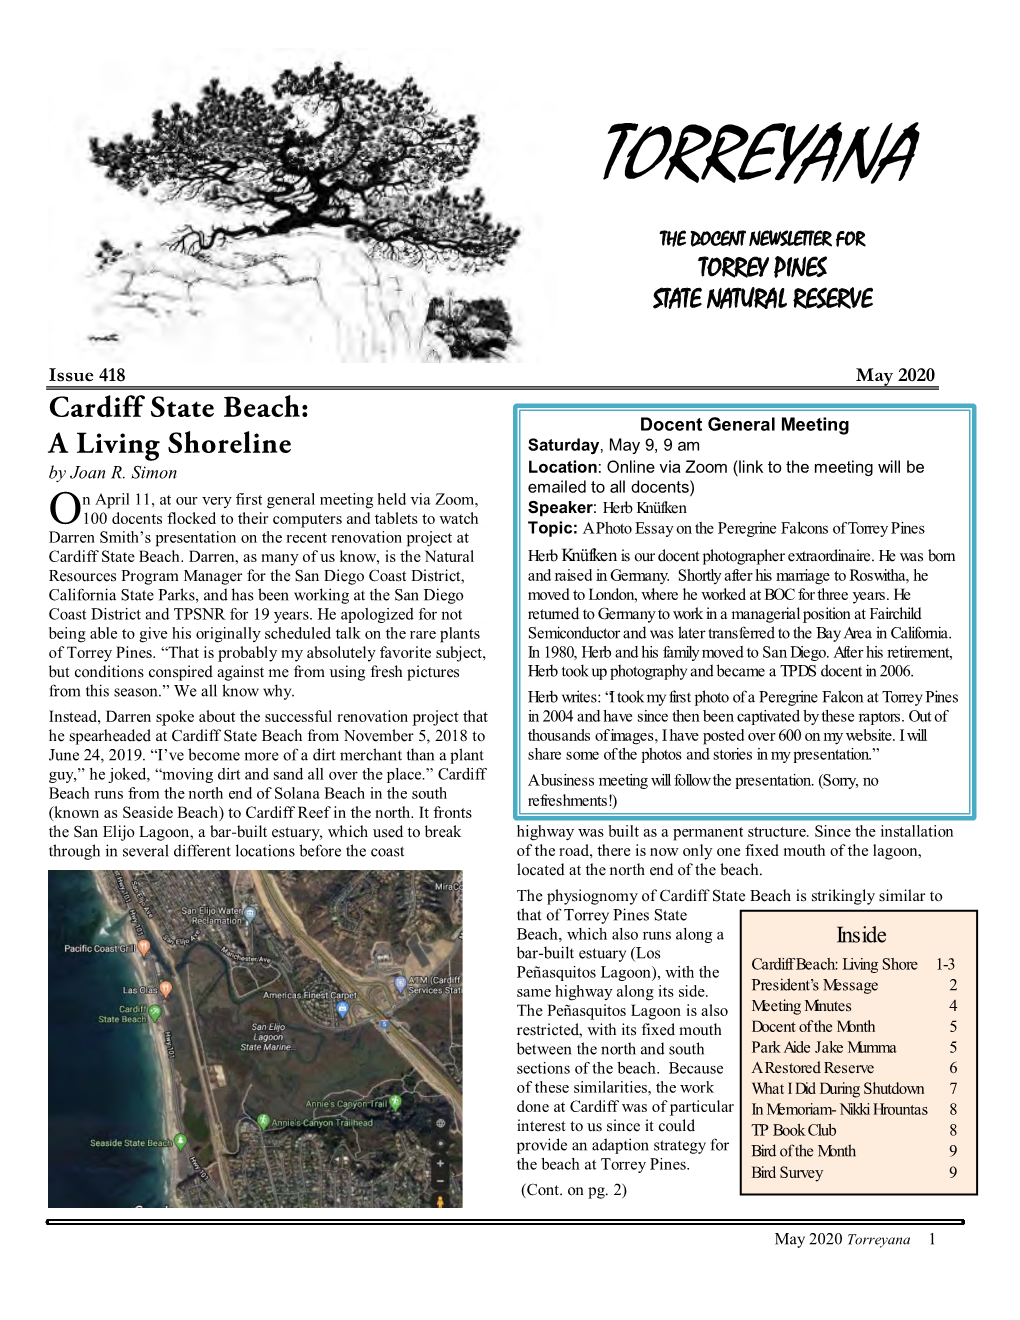 May 2020 Cardiff State Beach: Docent General Meeting a Living Shoreline Saturday, May 9, 9 Am by Joan R